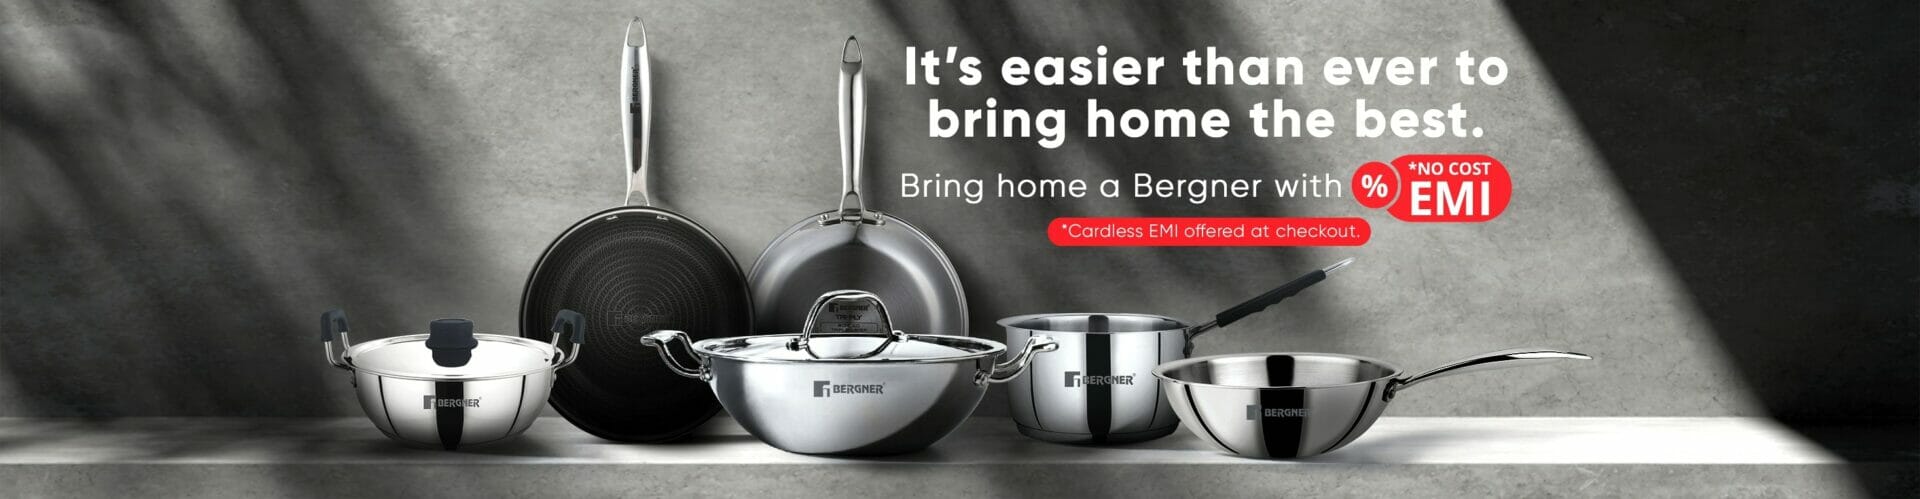 Bergner stainless Steel Cookware set - No cost Emi